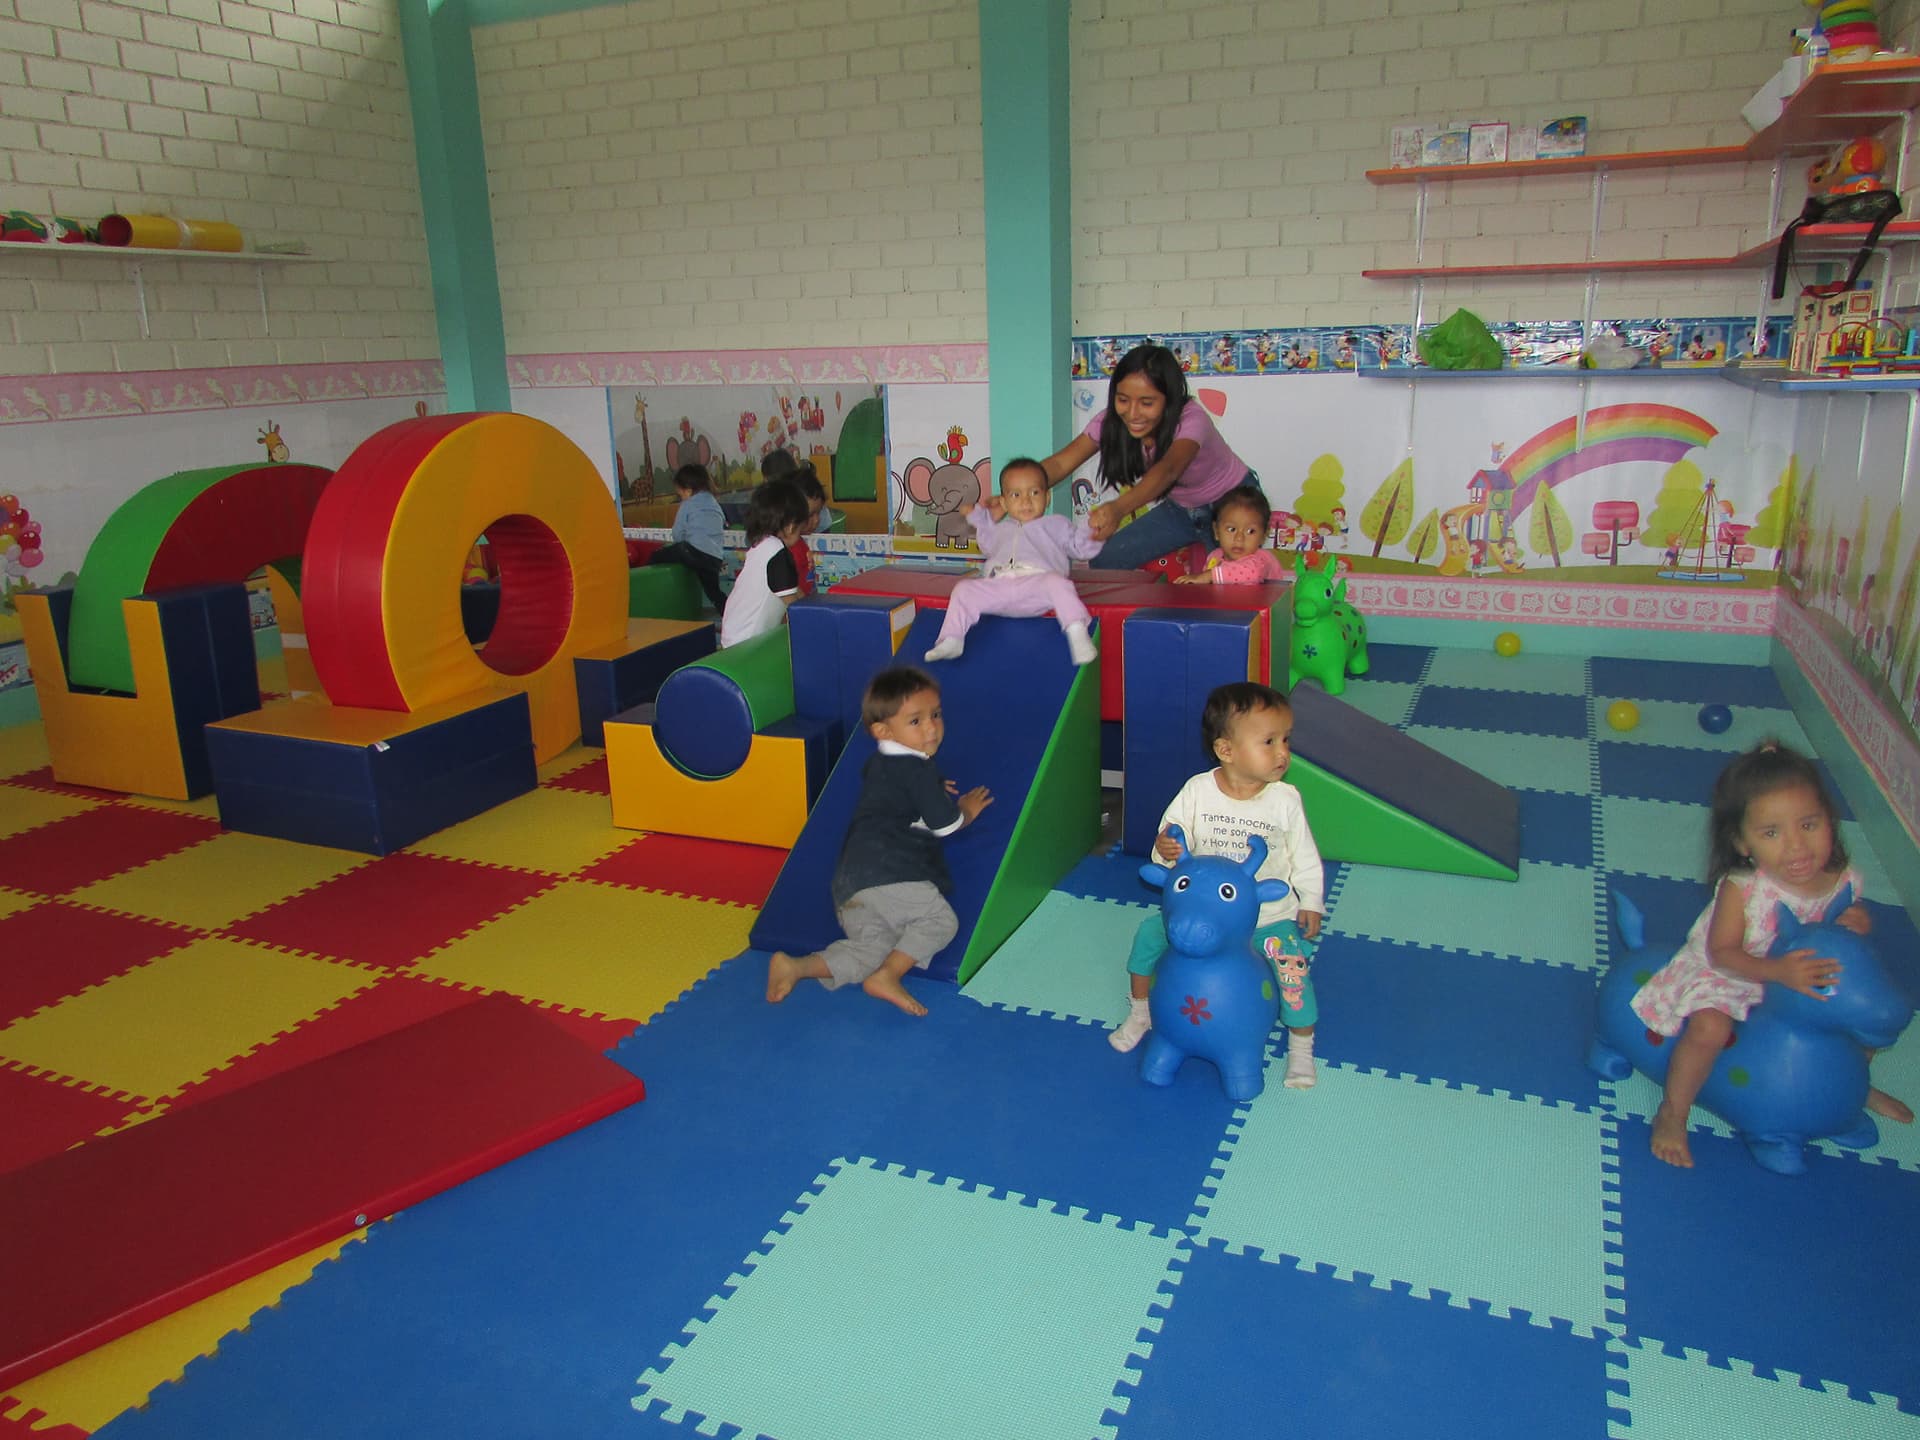 Kids play on colourful indoor playground.